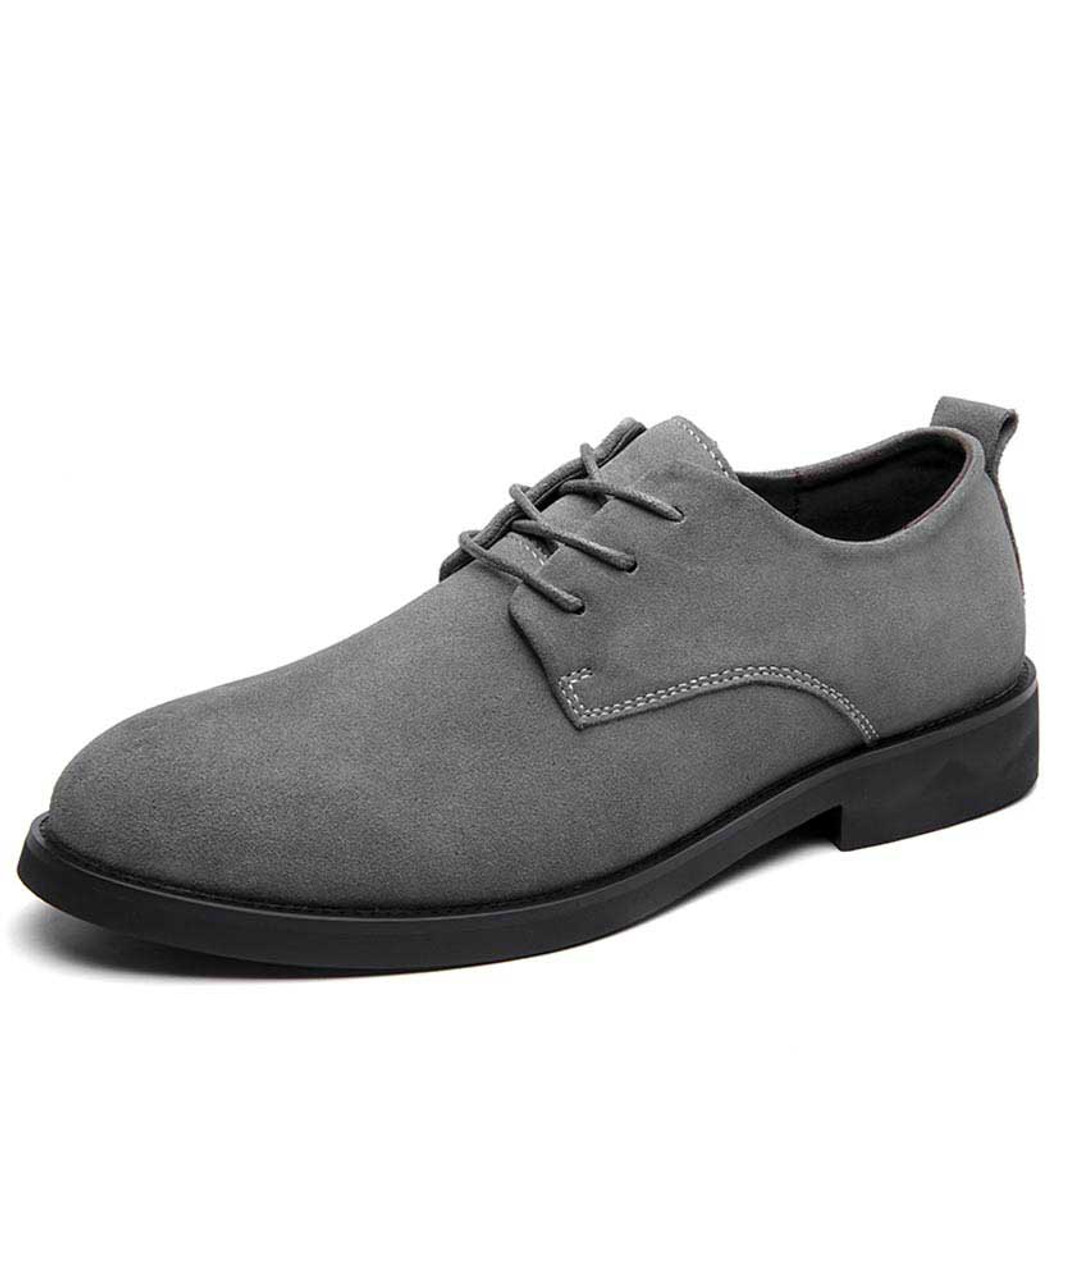 gray suede dress shoes